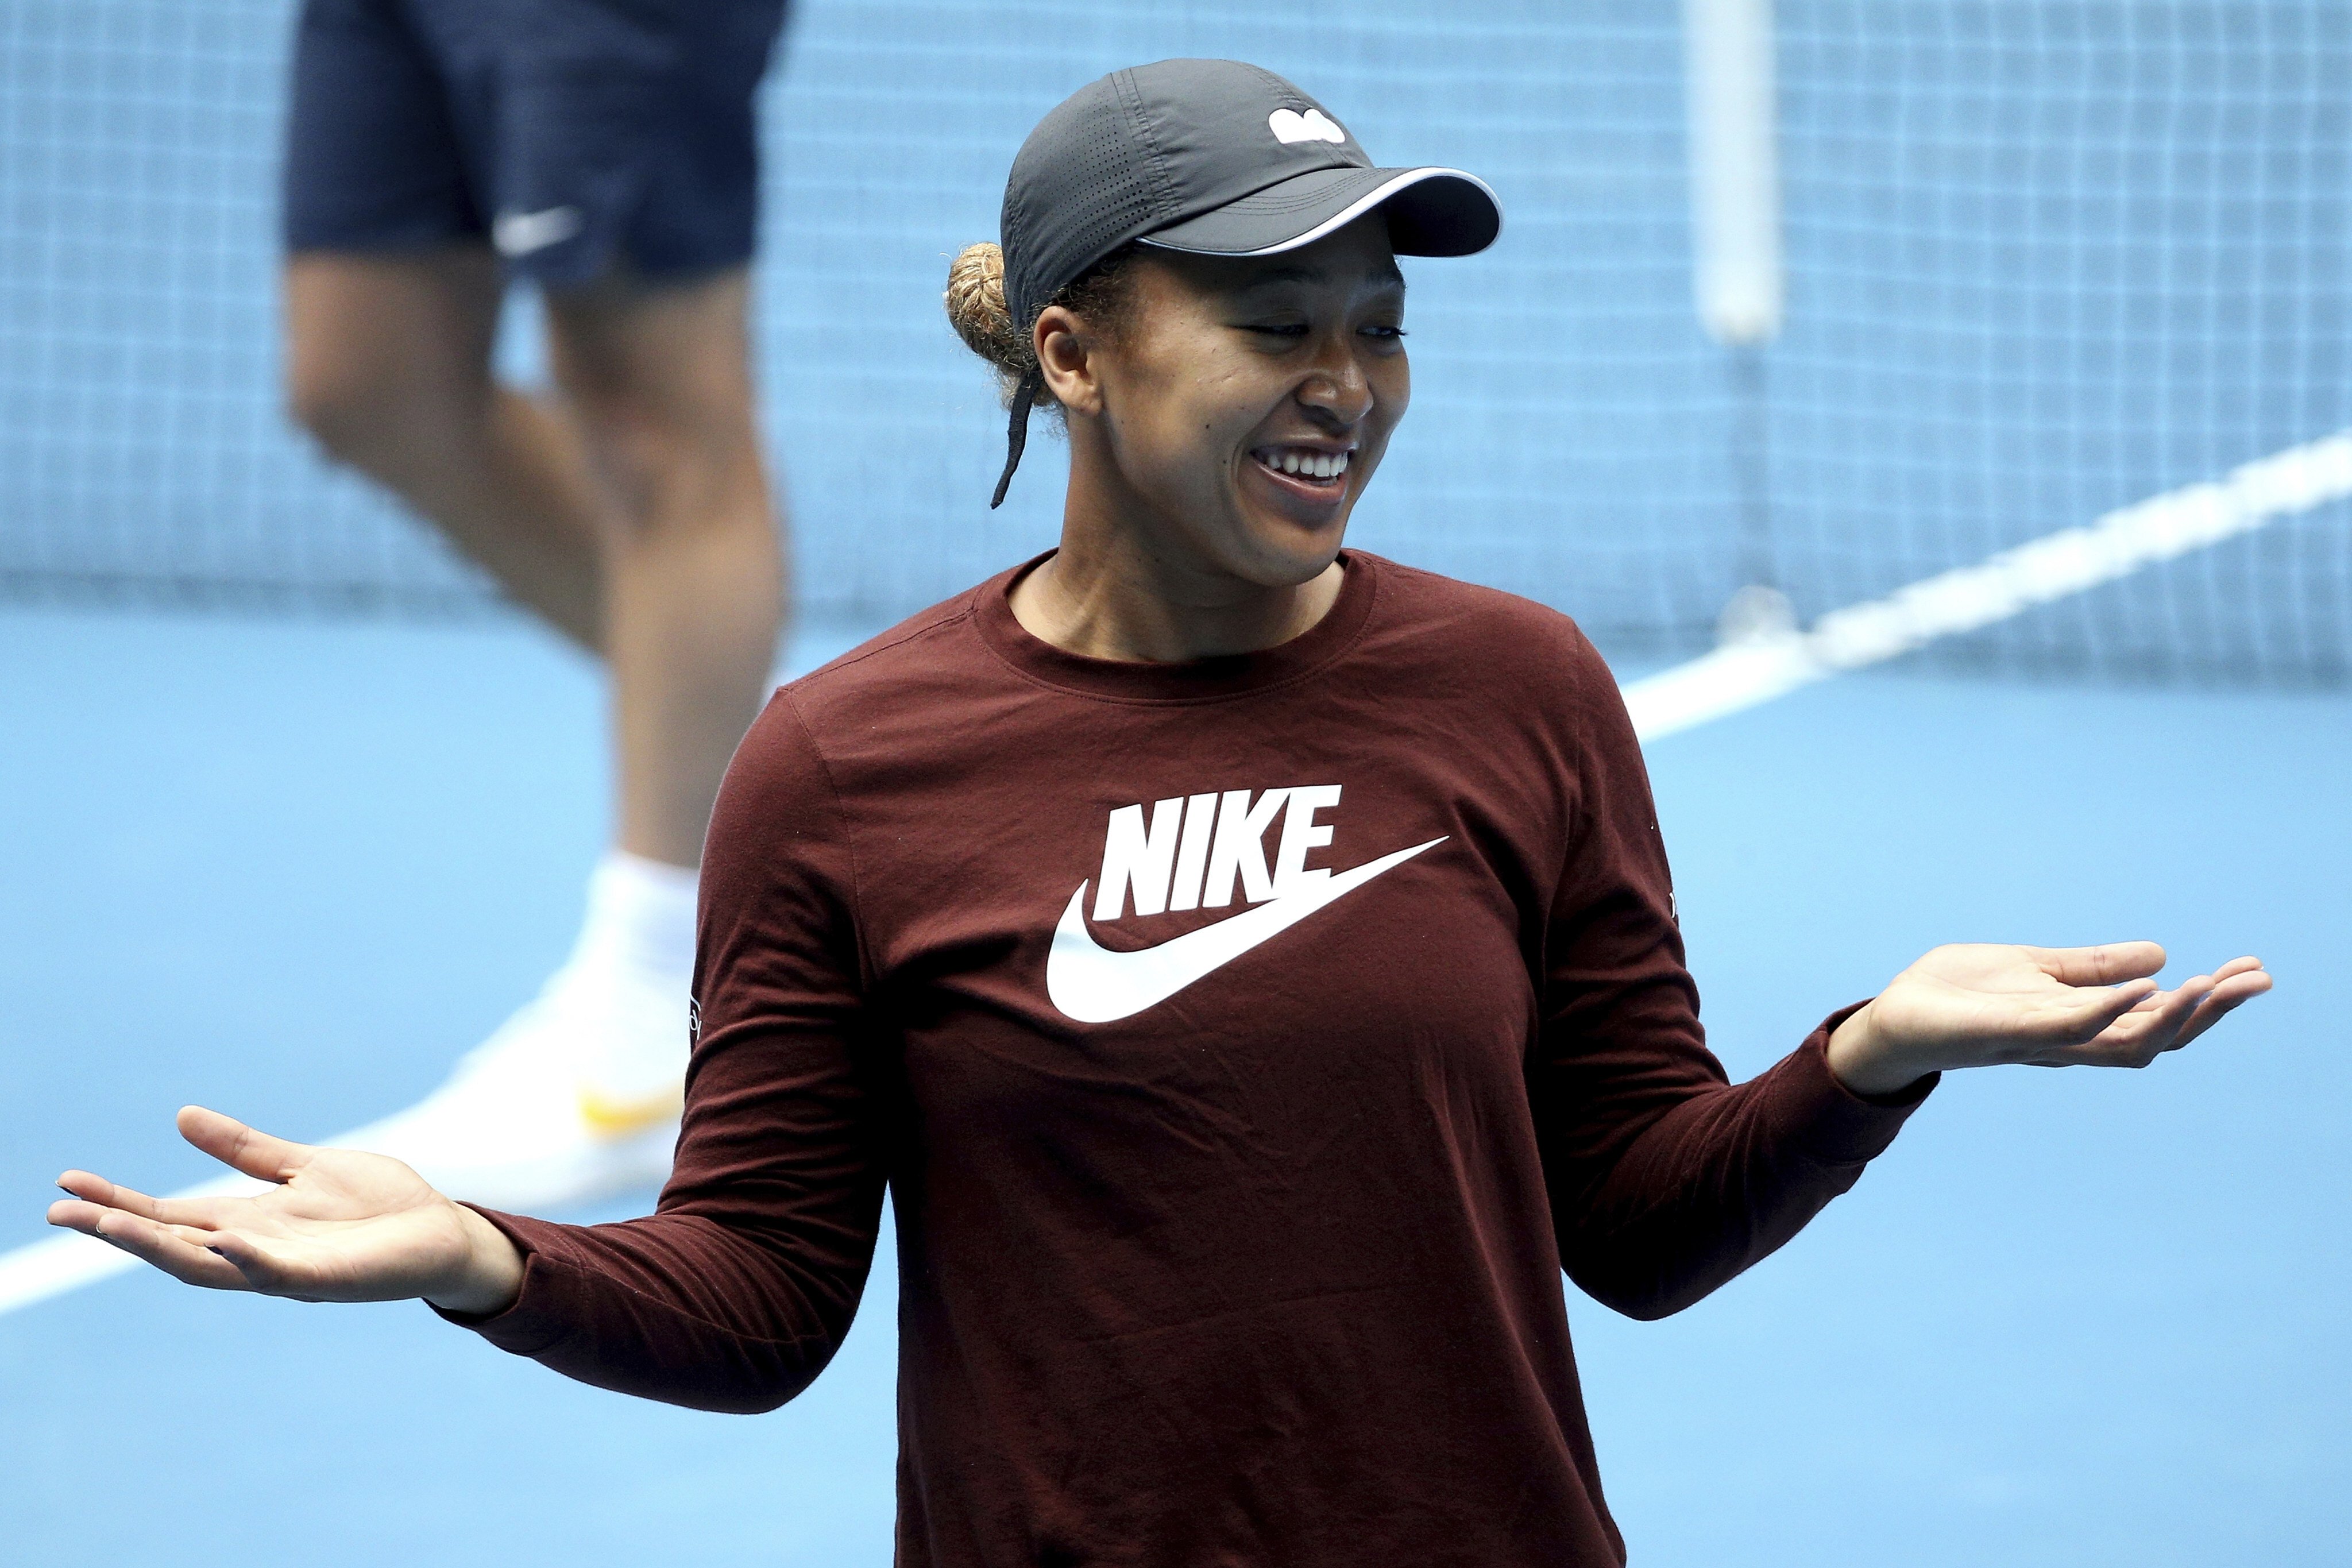 Naomi Osaka smiles during a practice session on Margaret Court Arena at the Summer Set tennis tournament ahead of the Australian Open in Melbourne. Photo: AP